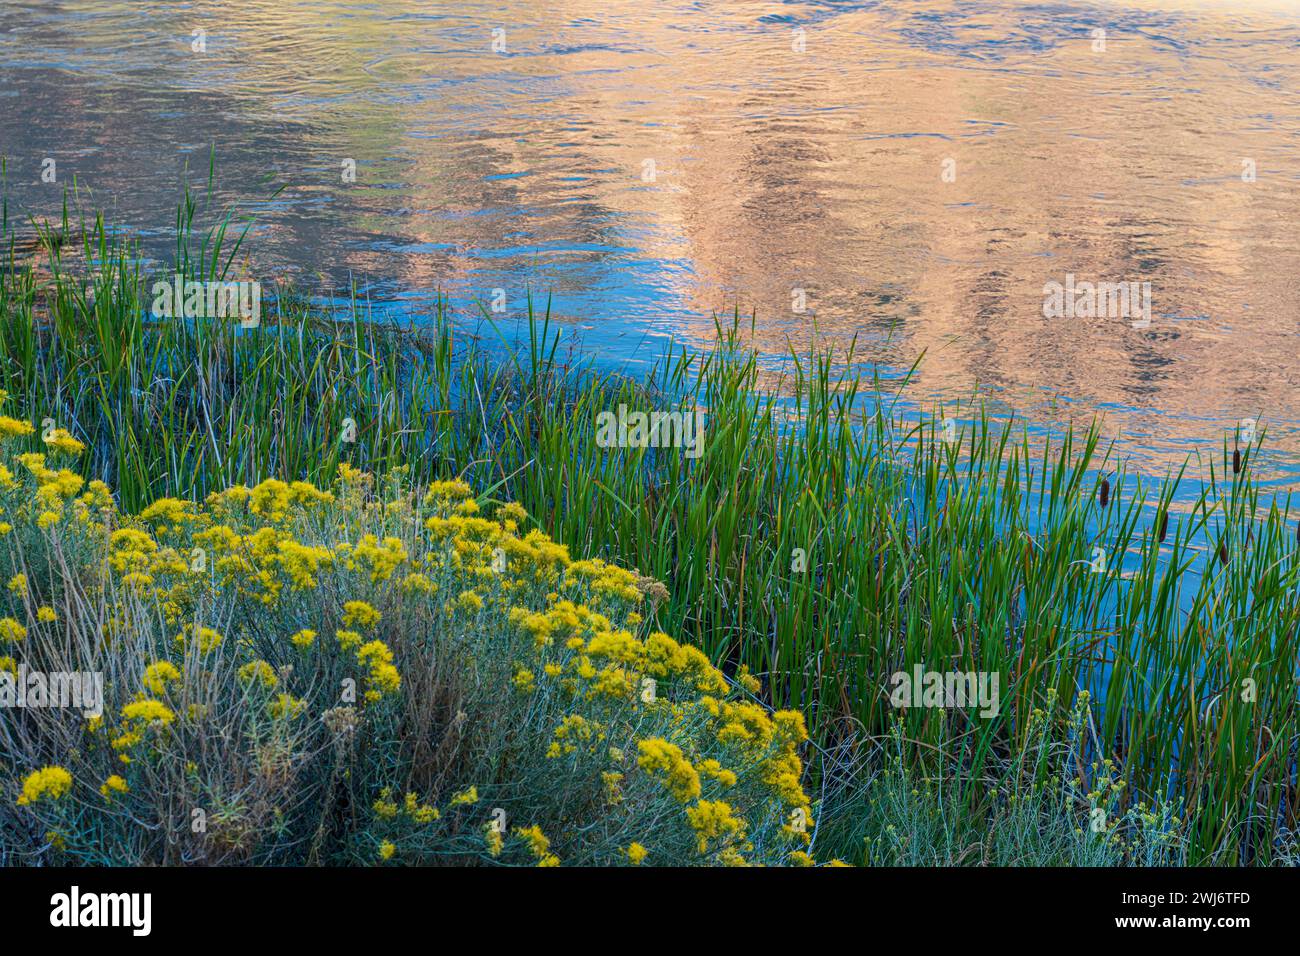 FLOWERS AND CATTAILS ALONG THE CHAMA RIVER, ABIQUIU, NM, USA Stock Photo